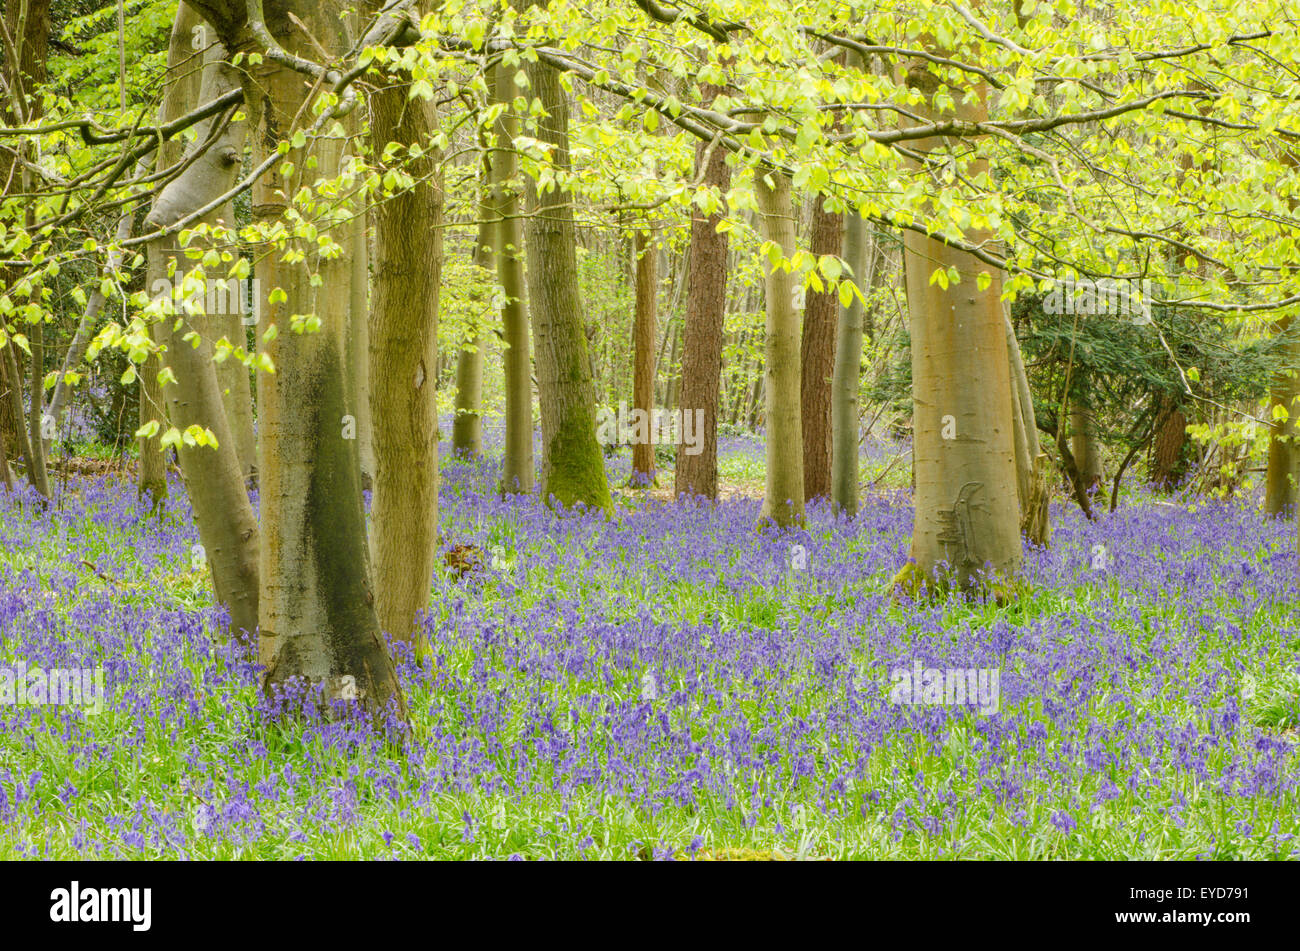 Bluebells in Stoke Wood, West Stoke, near Chichester, West Sussex, UK. April. Mixed woodland. Stock Photo